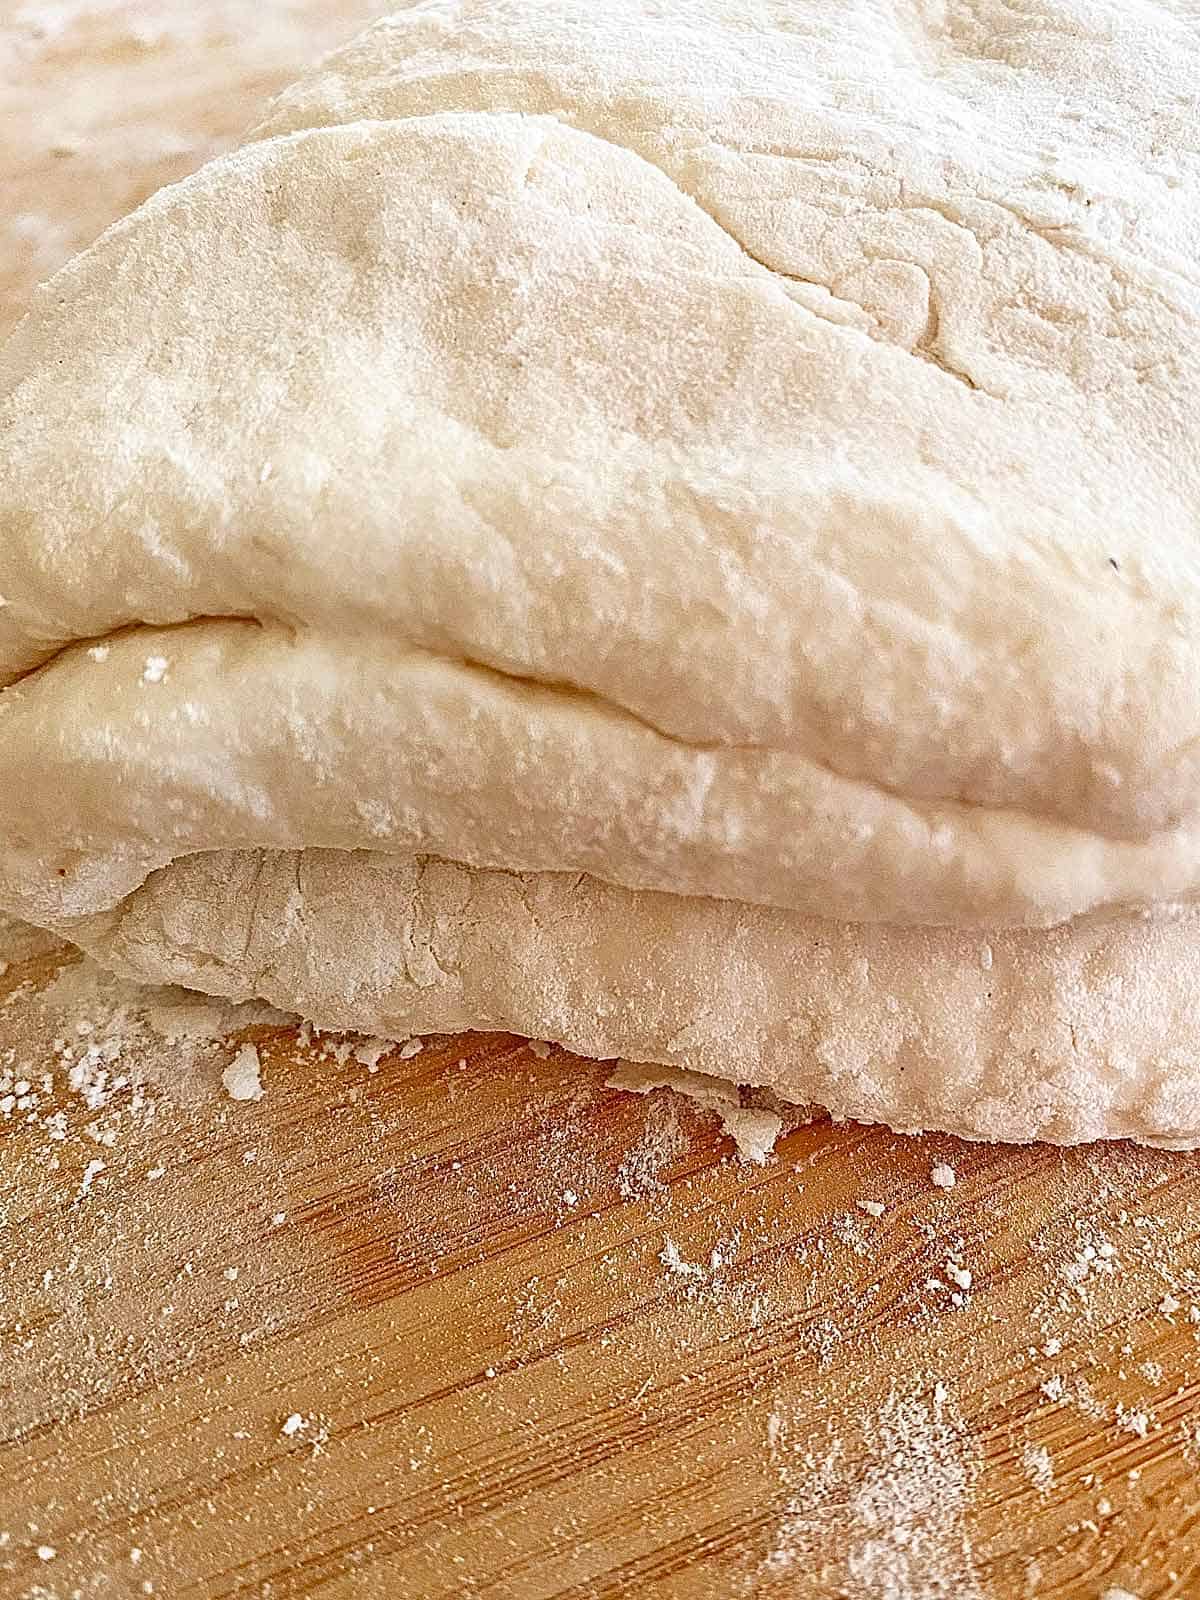 Biscuit dough that has been folded 8 times.